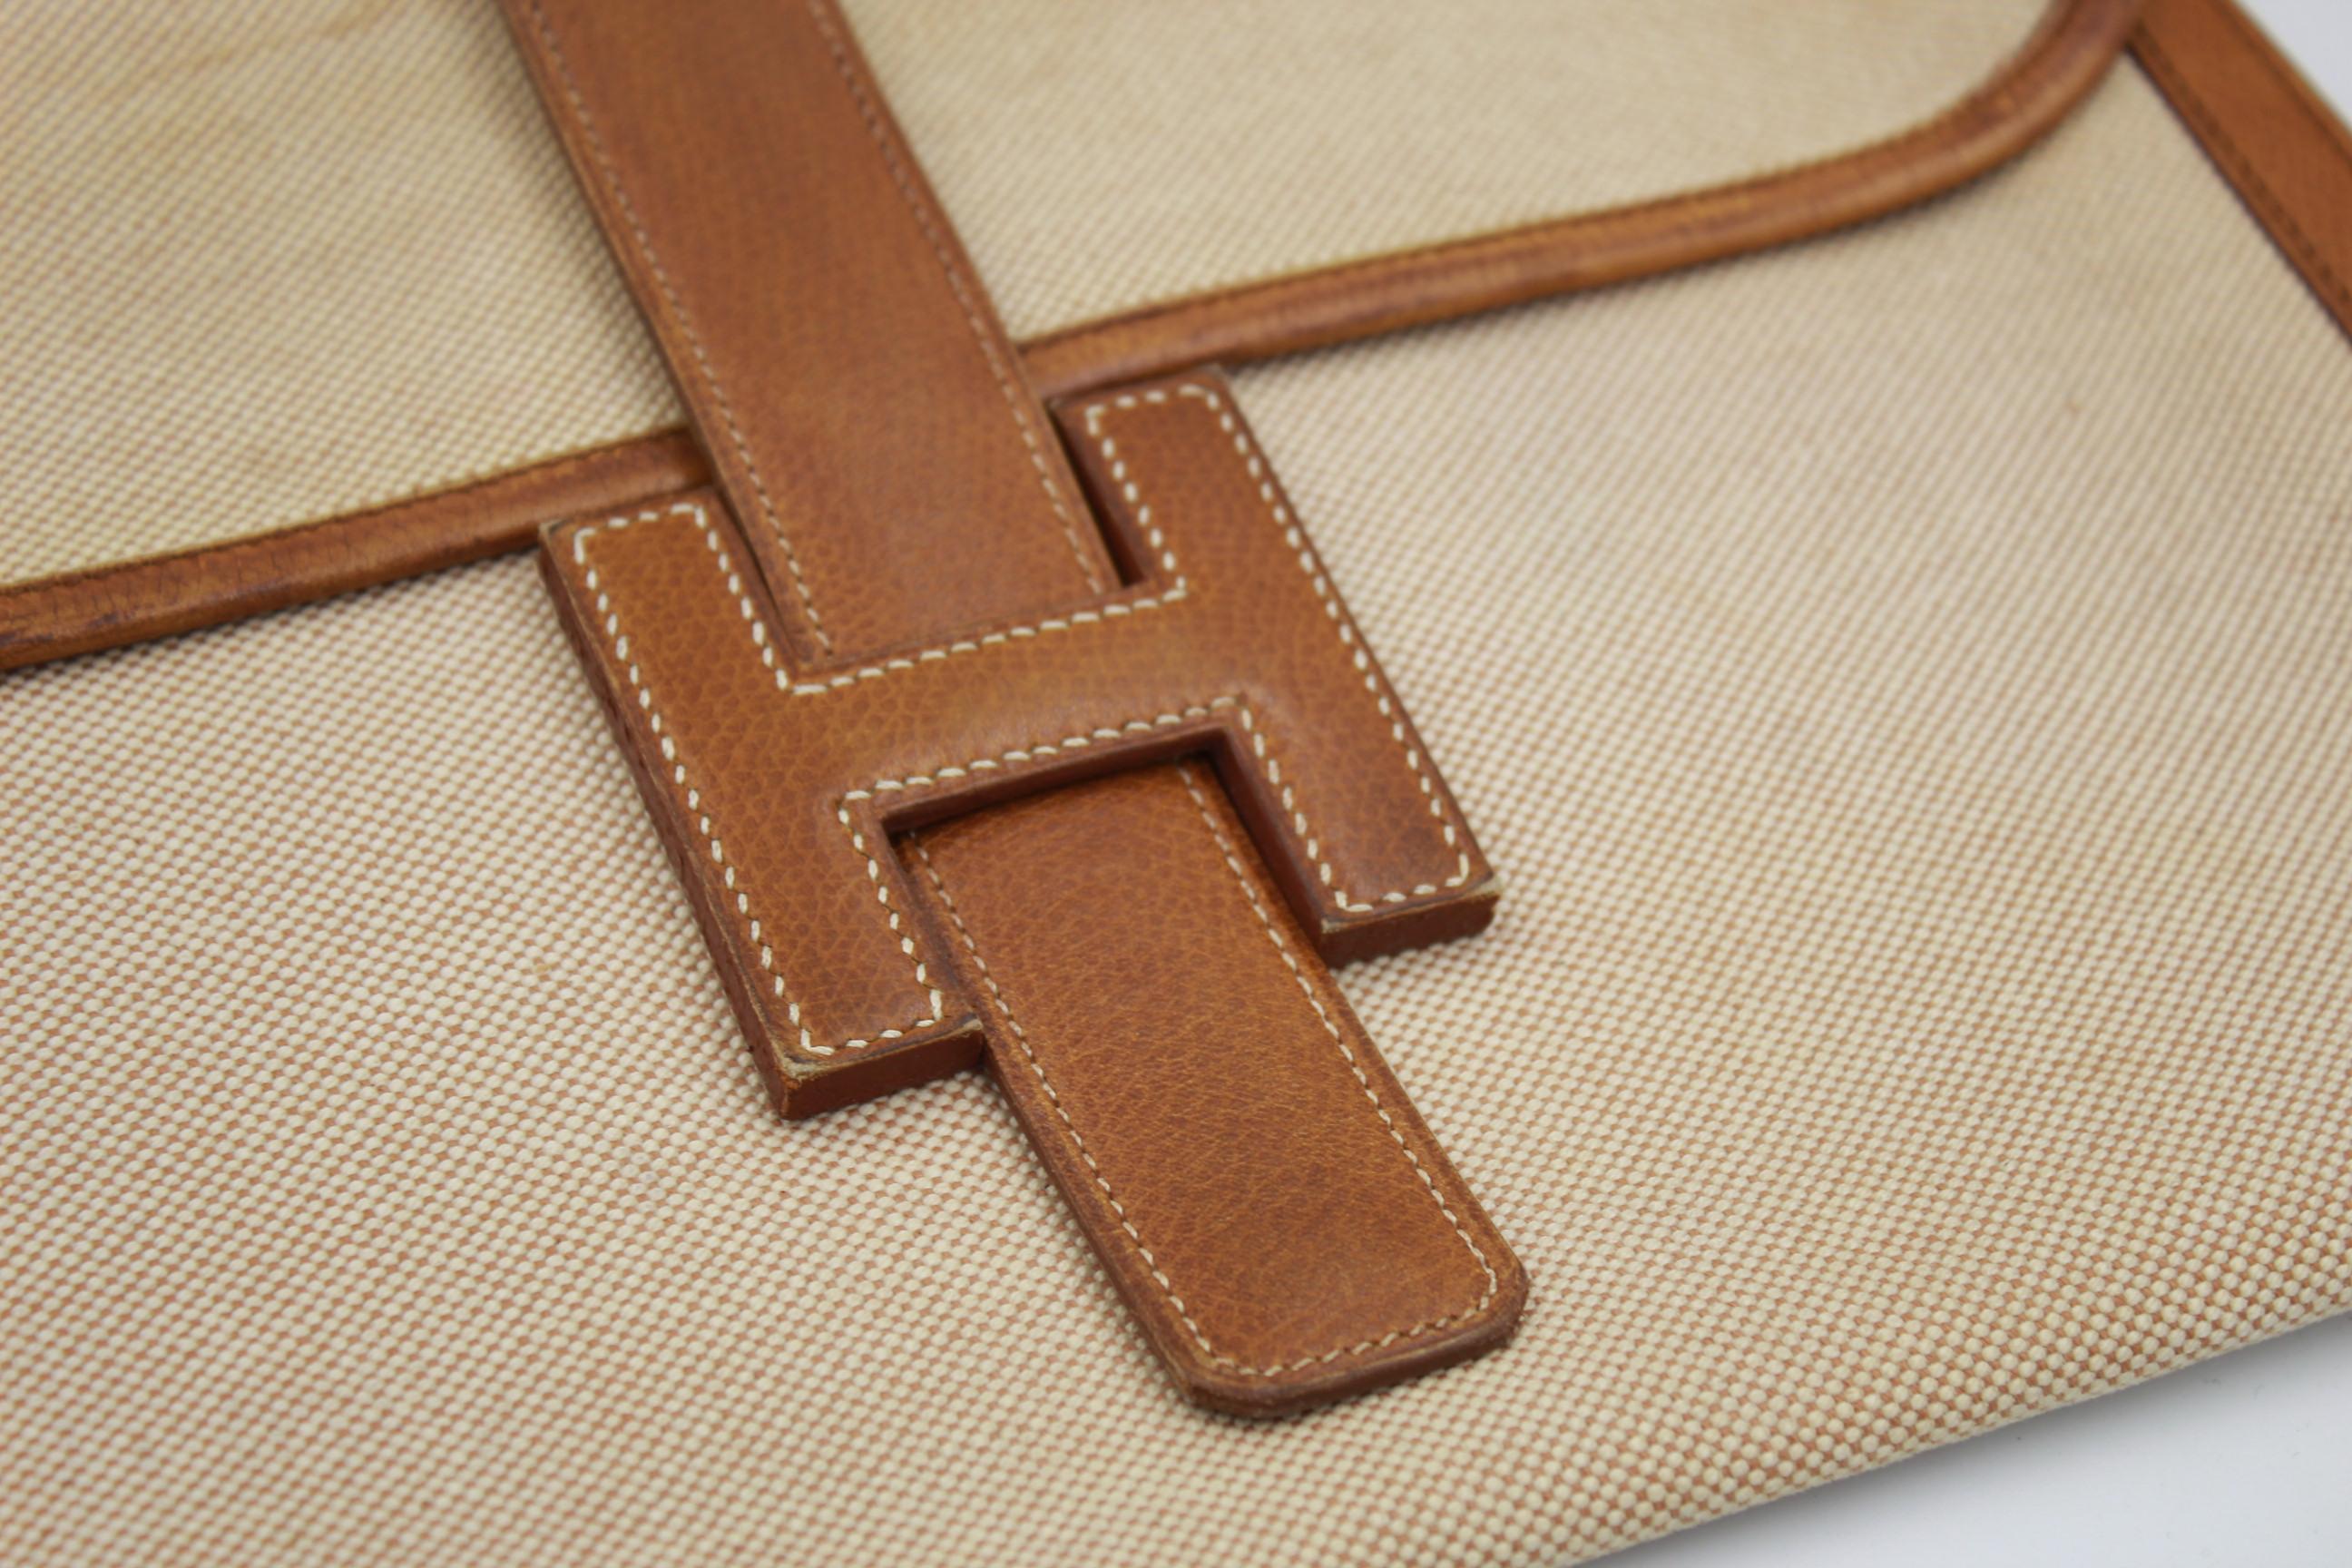 Brown Vintage Hermes Jige MM Clutch in Canvas and Leather.